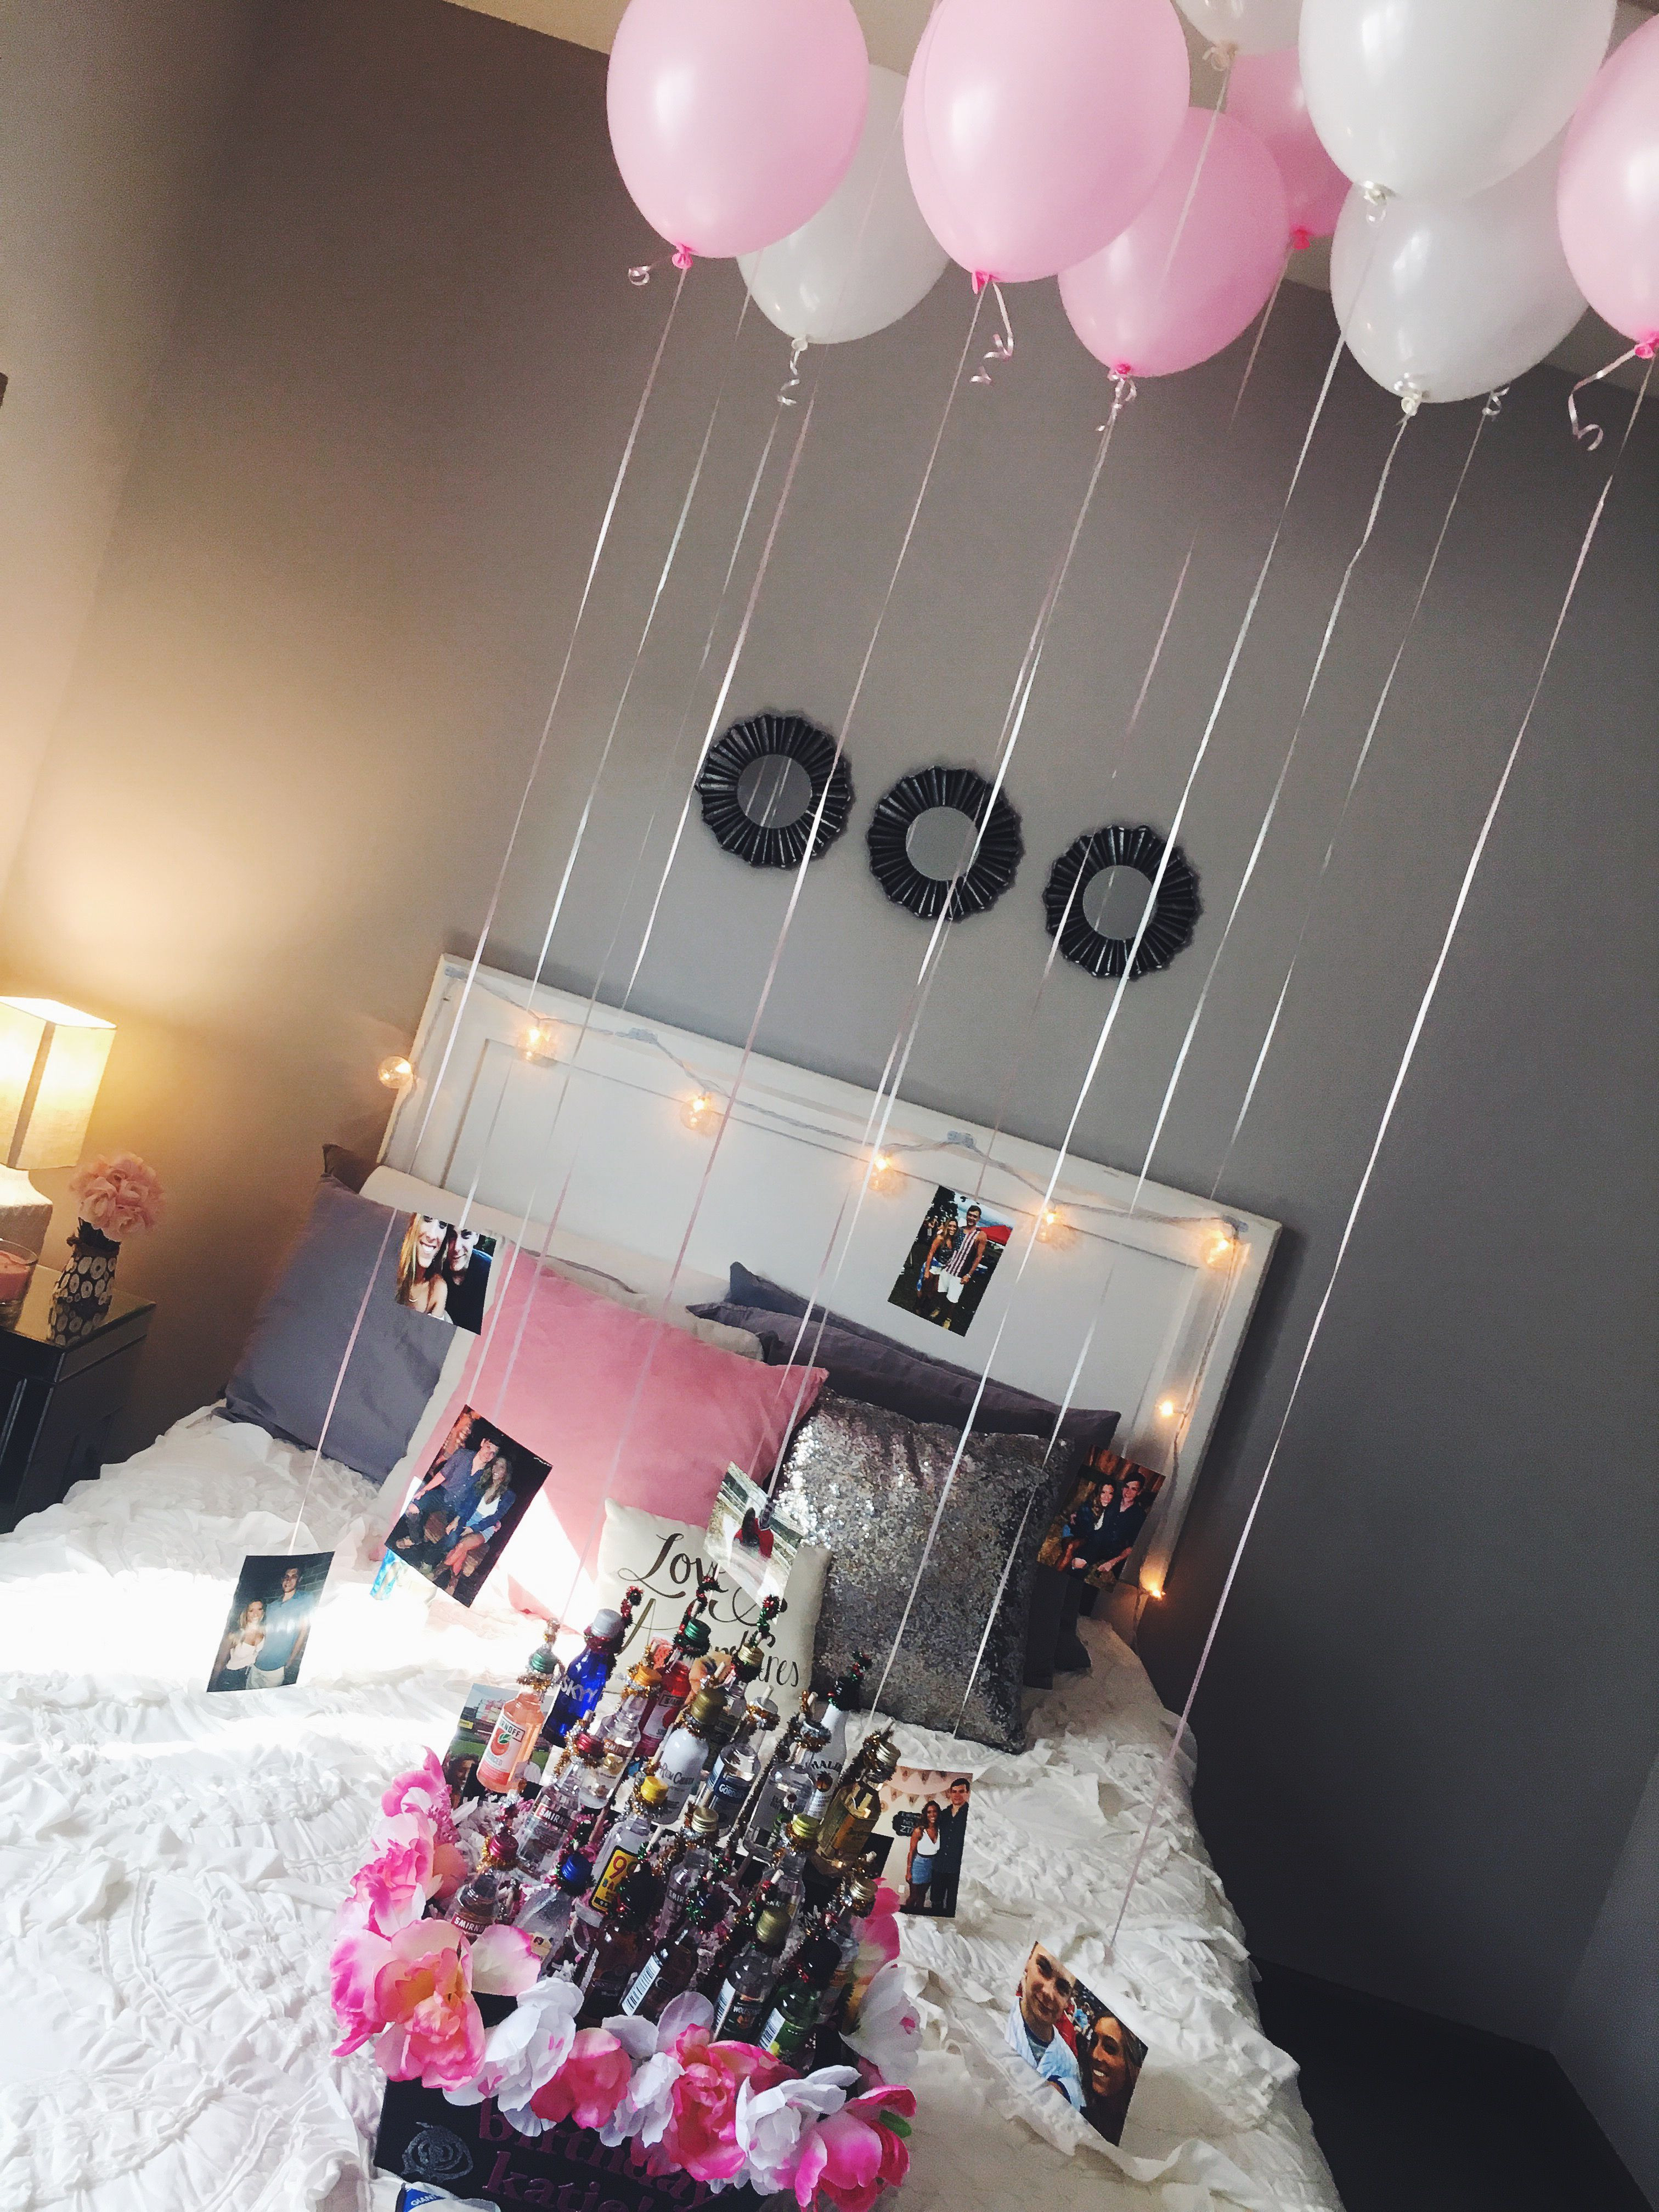 21St Birthday Gift Ideas For Girlfriend
 easy and cute decorations for a friend or girlfriends 21st